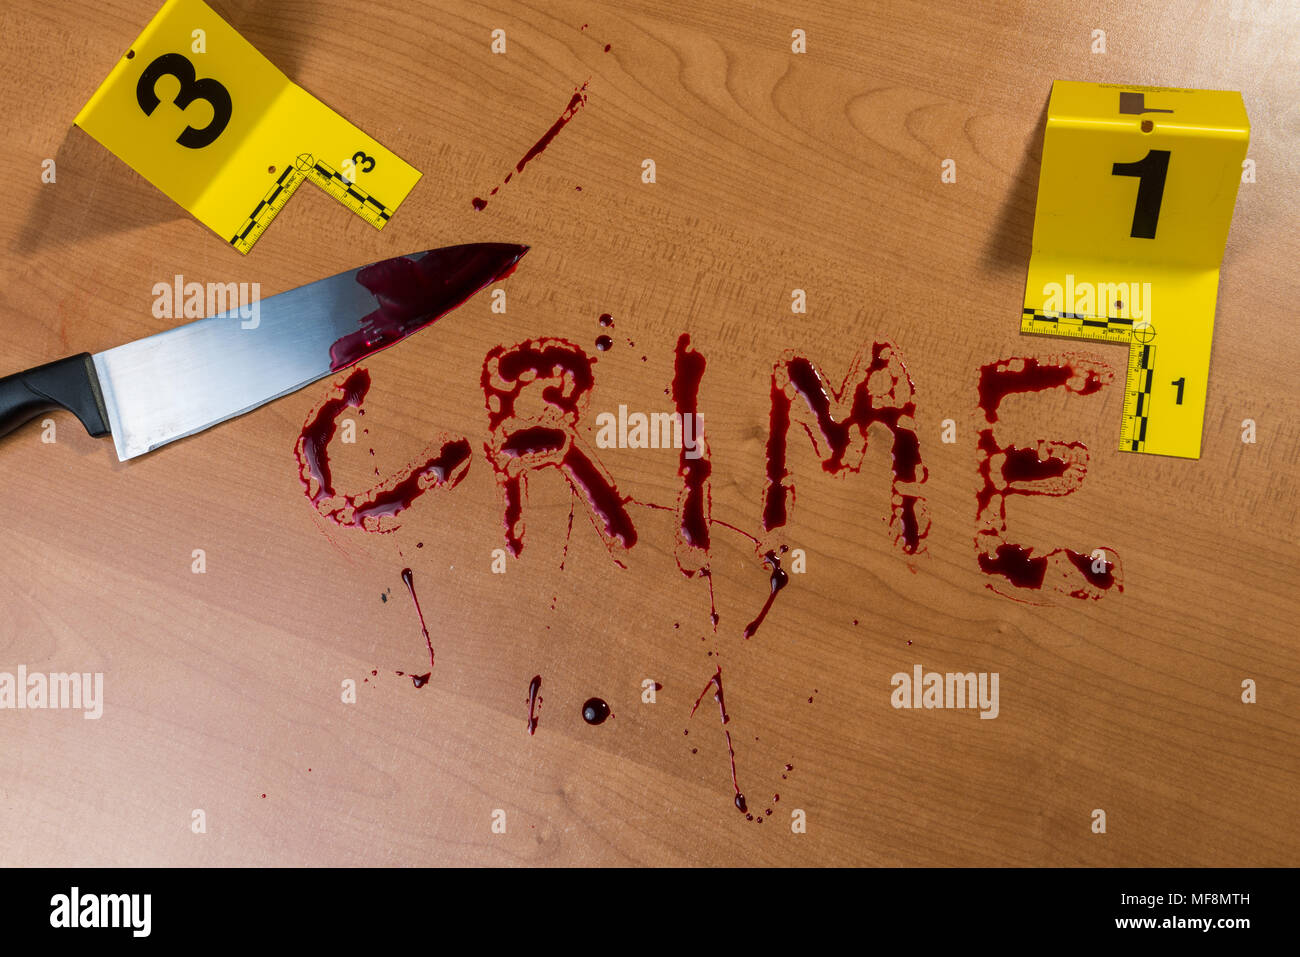 The word “crime” written in blood on a wood surface beside a bloody knife, both marked by crime scene evidence markers. Stock Photo